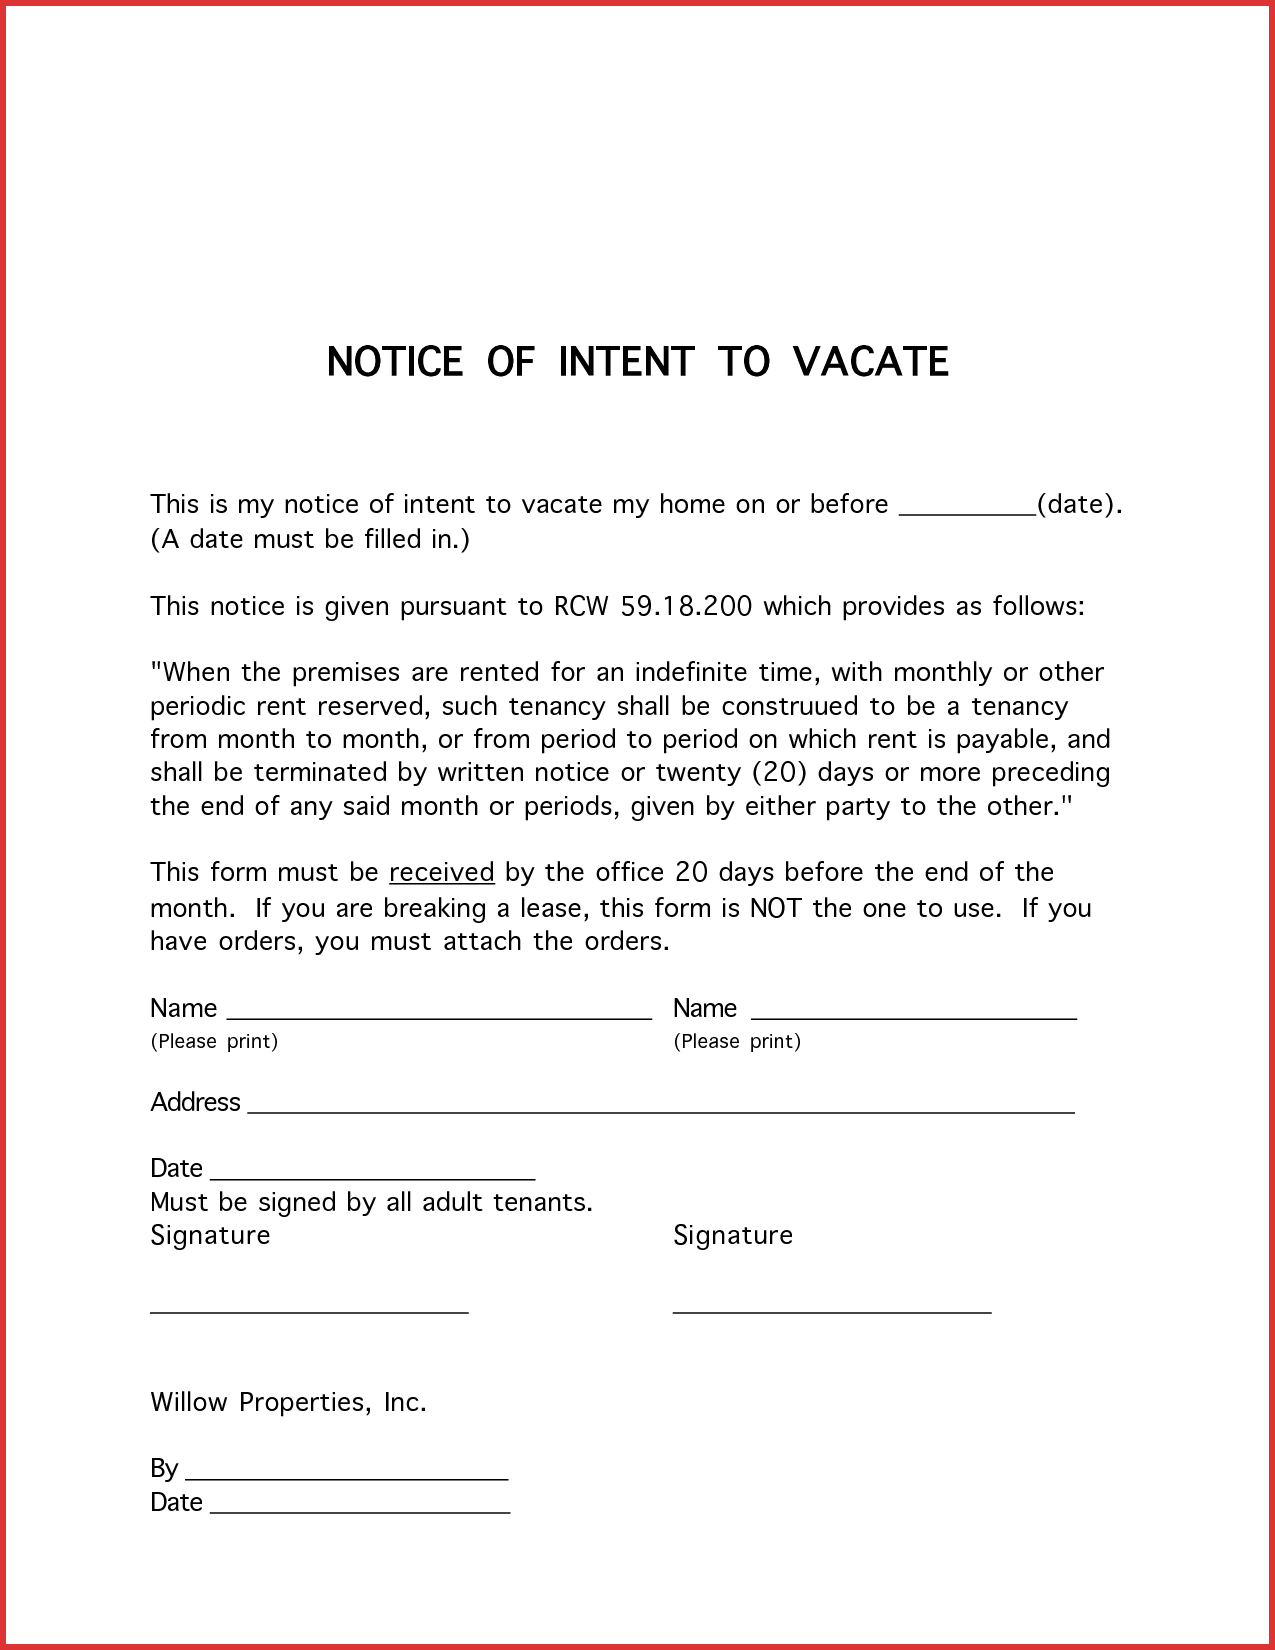 Letter Of Intent to Evict Template - Notice Intent to Evicter Best Eviction Template Design